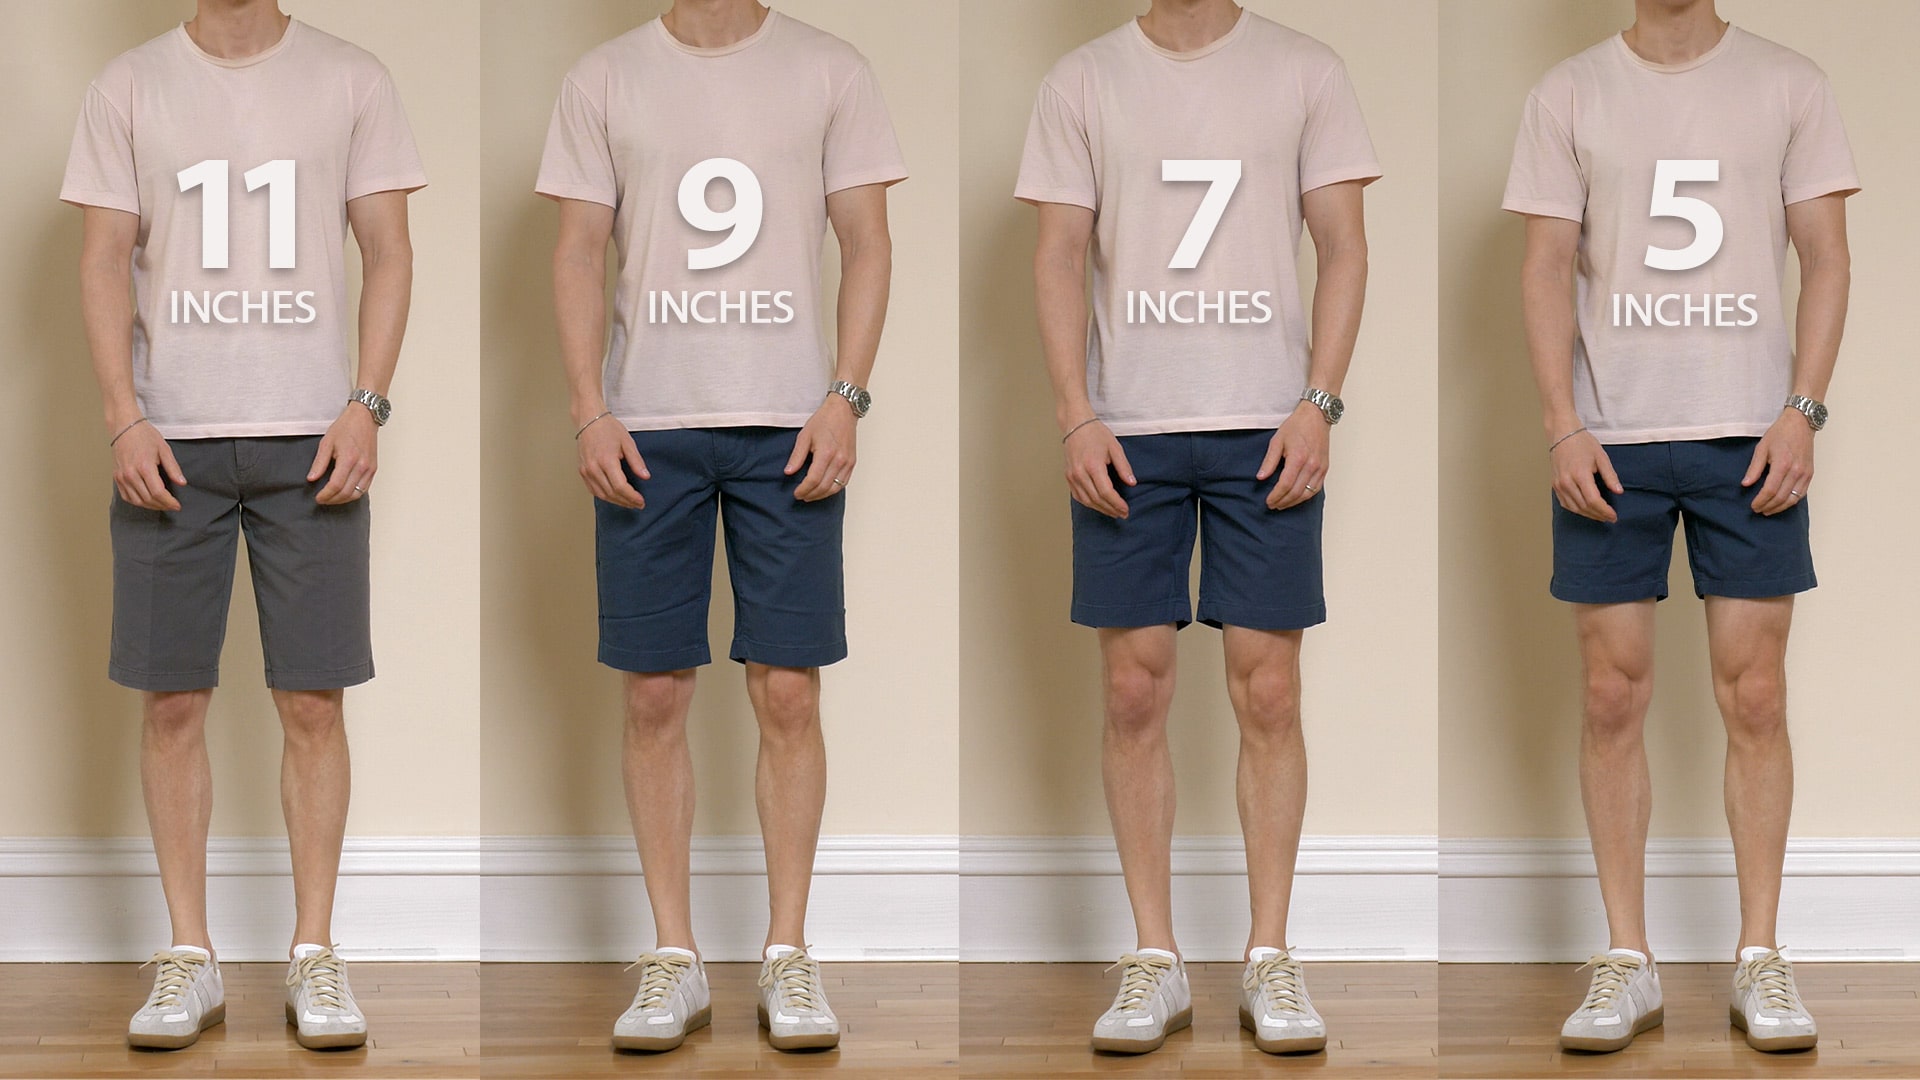 How Men's Shorts Should Properly Fit!  A SIMPLE GUIDE TO MEN'S SHORTS FIT  